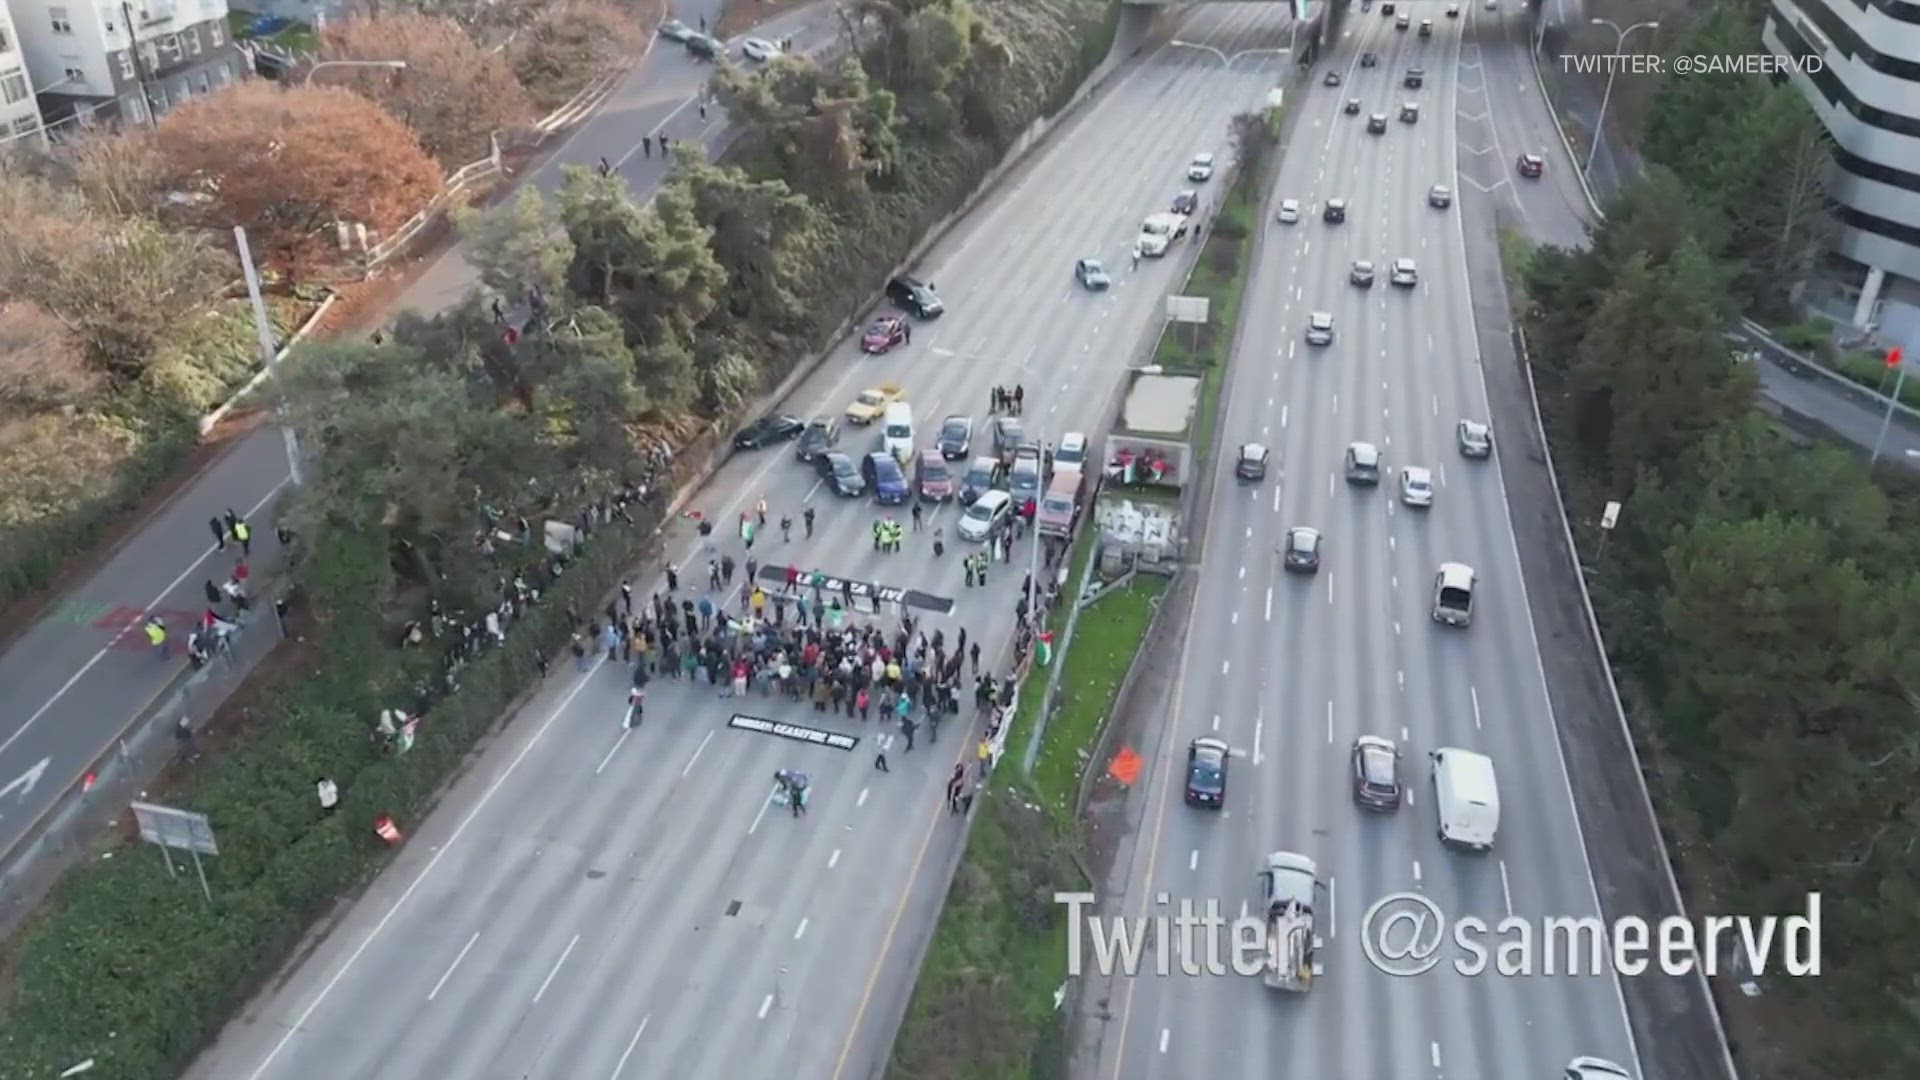 Protesters calling for ceasefire in Gaza block all NB I5 lanes in